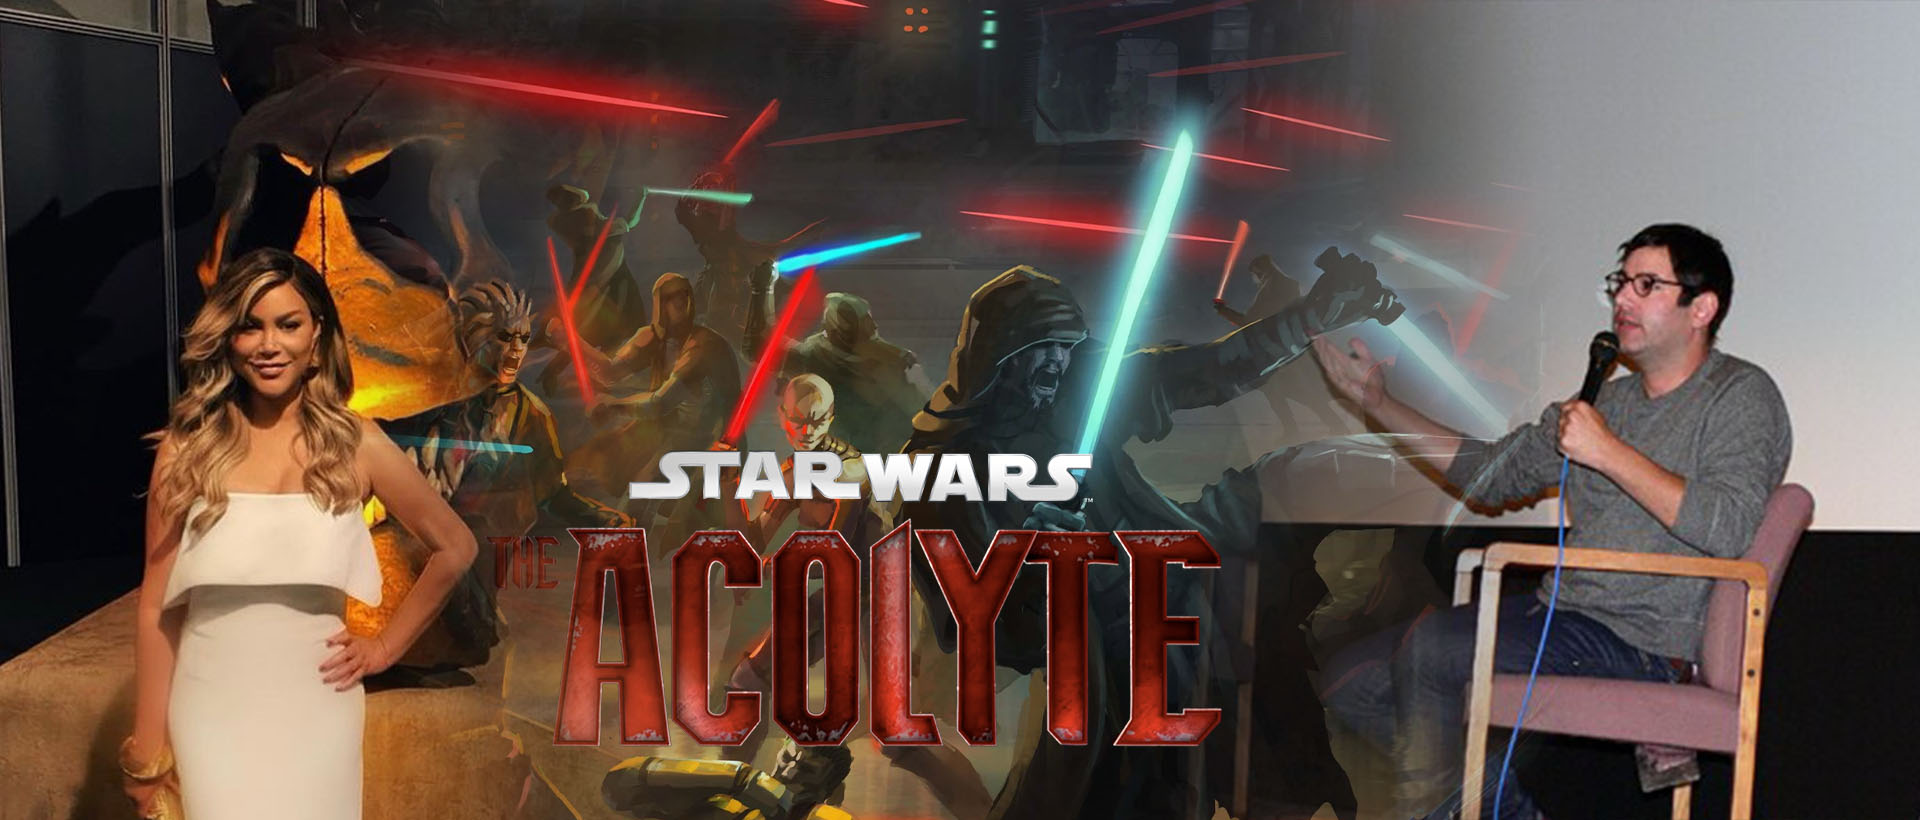 star wars alcolyte writers room banner